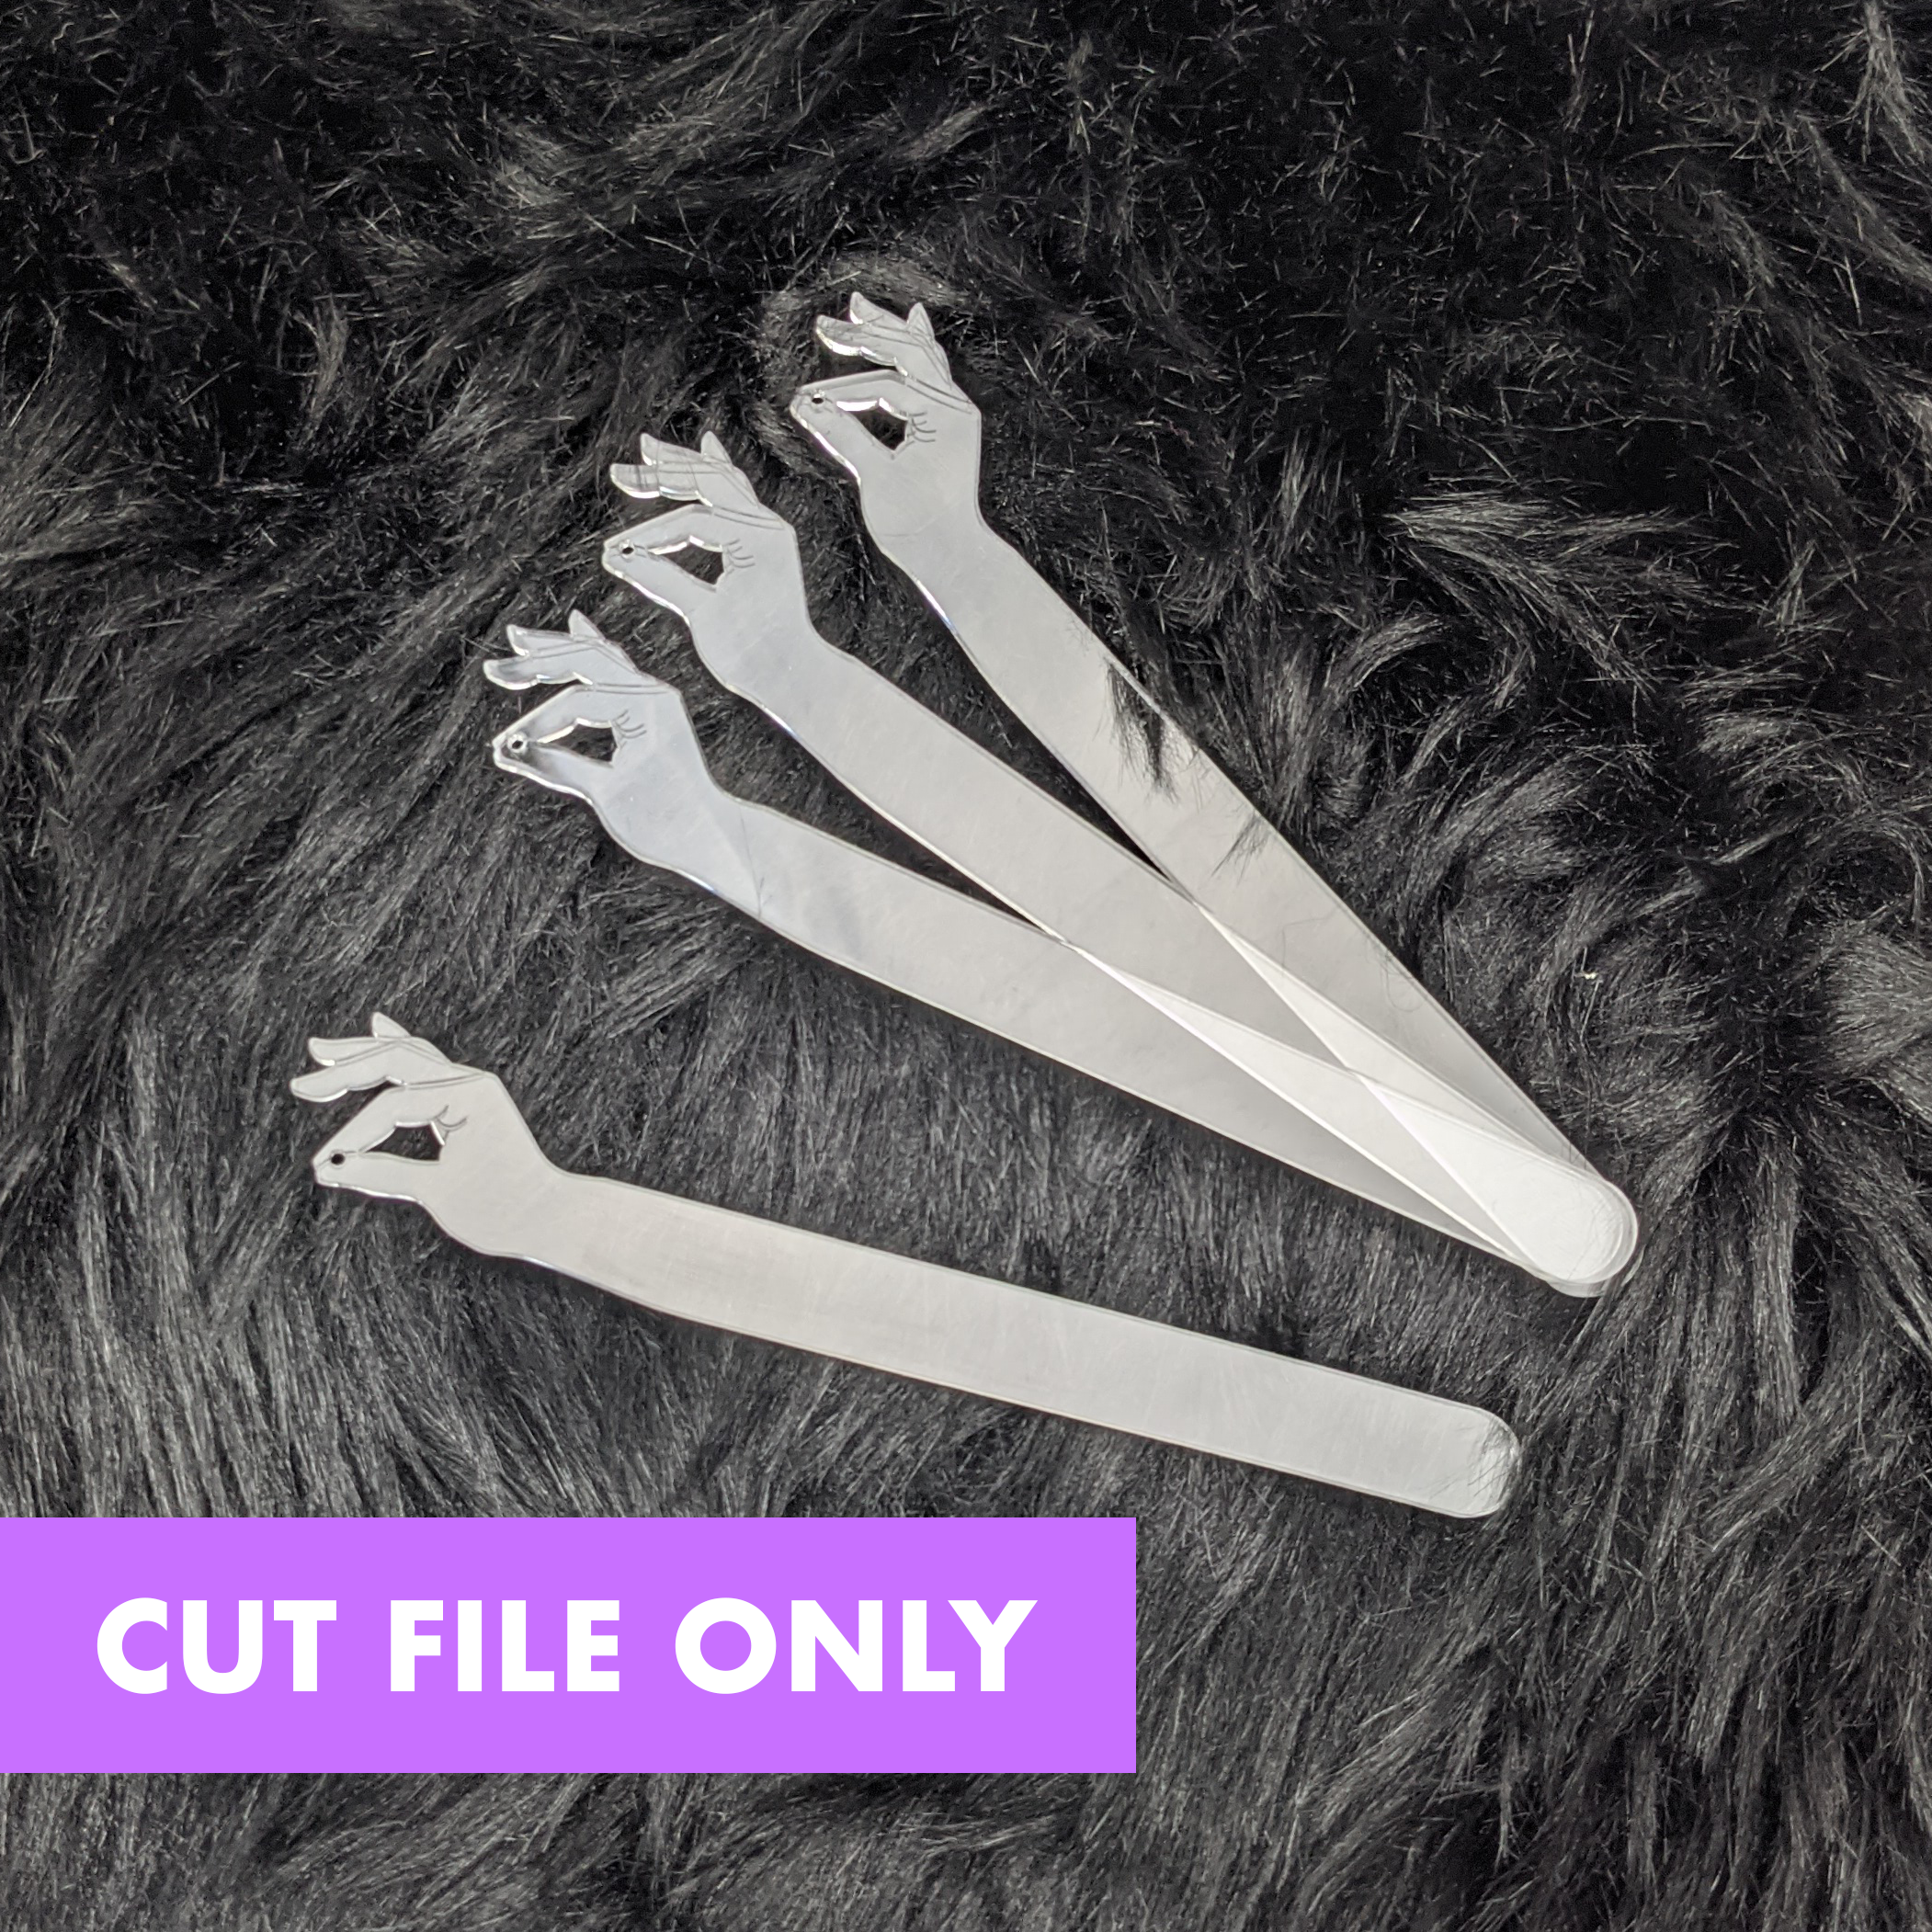 CUT FILE ONLY: Pinch Hand Earring Try-on Sticks